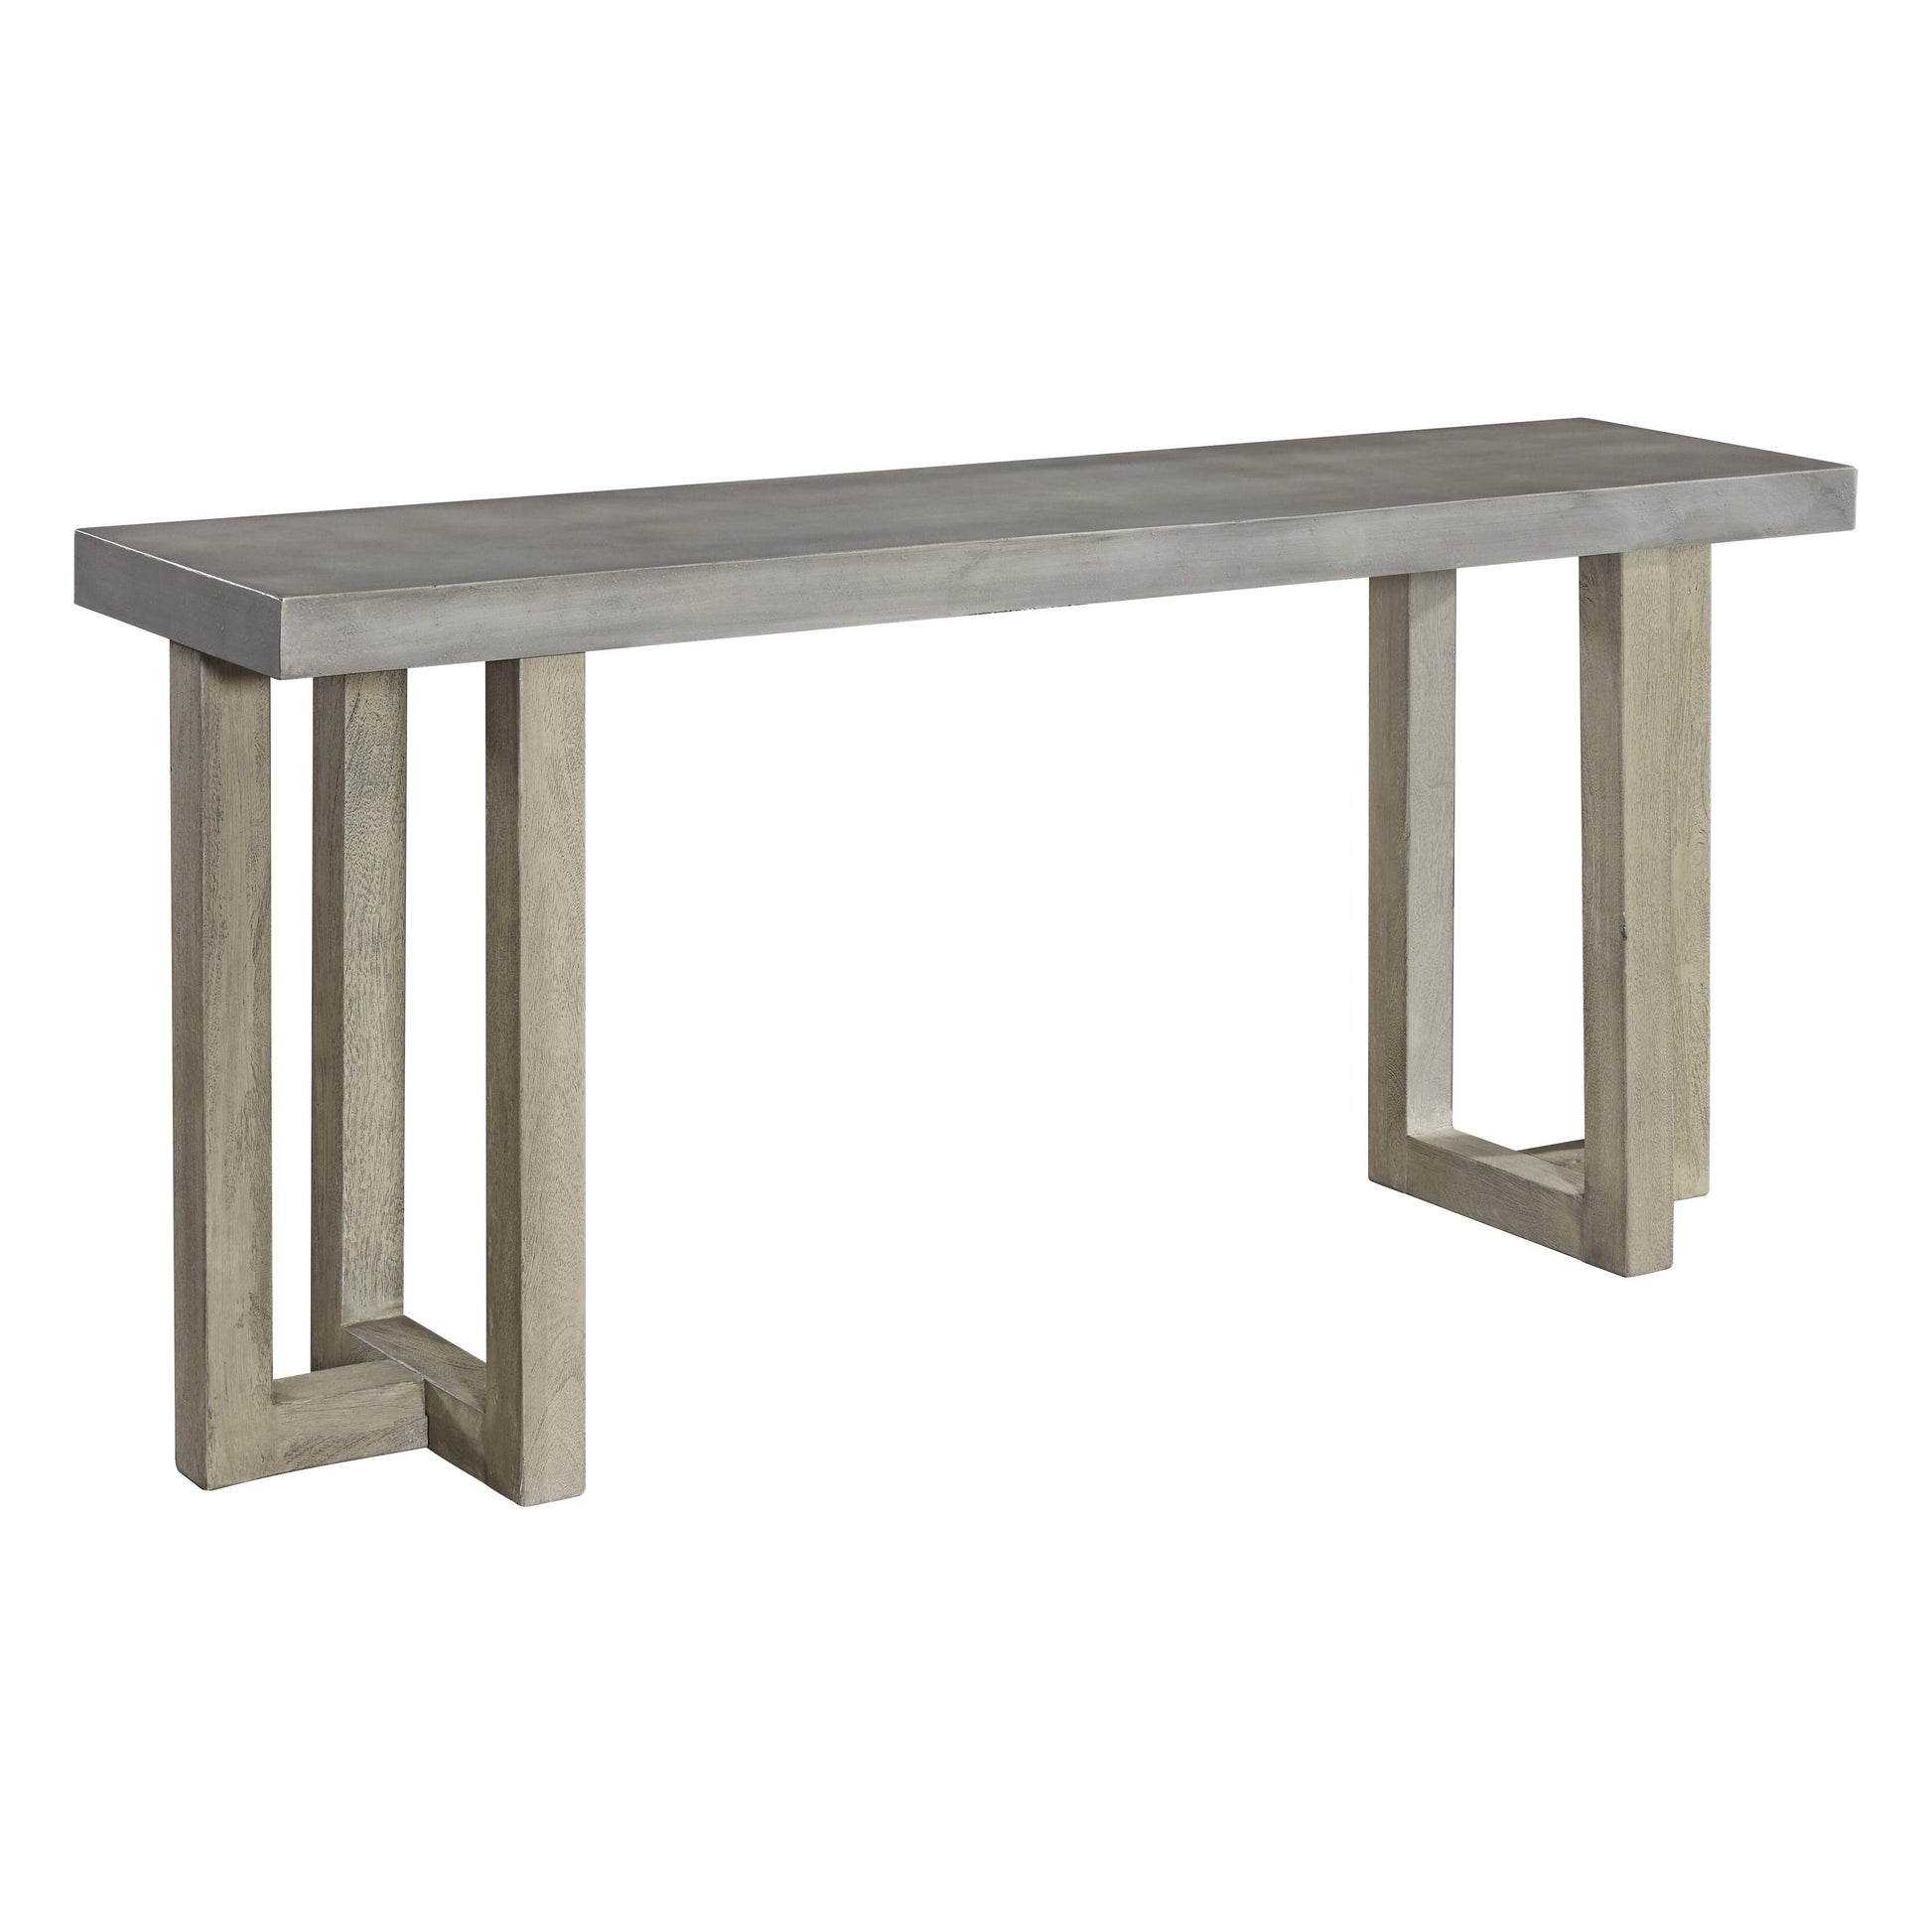 Signature Design by Ashley Lockthorne Console Table T988-4 IMAGE 1